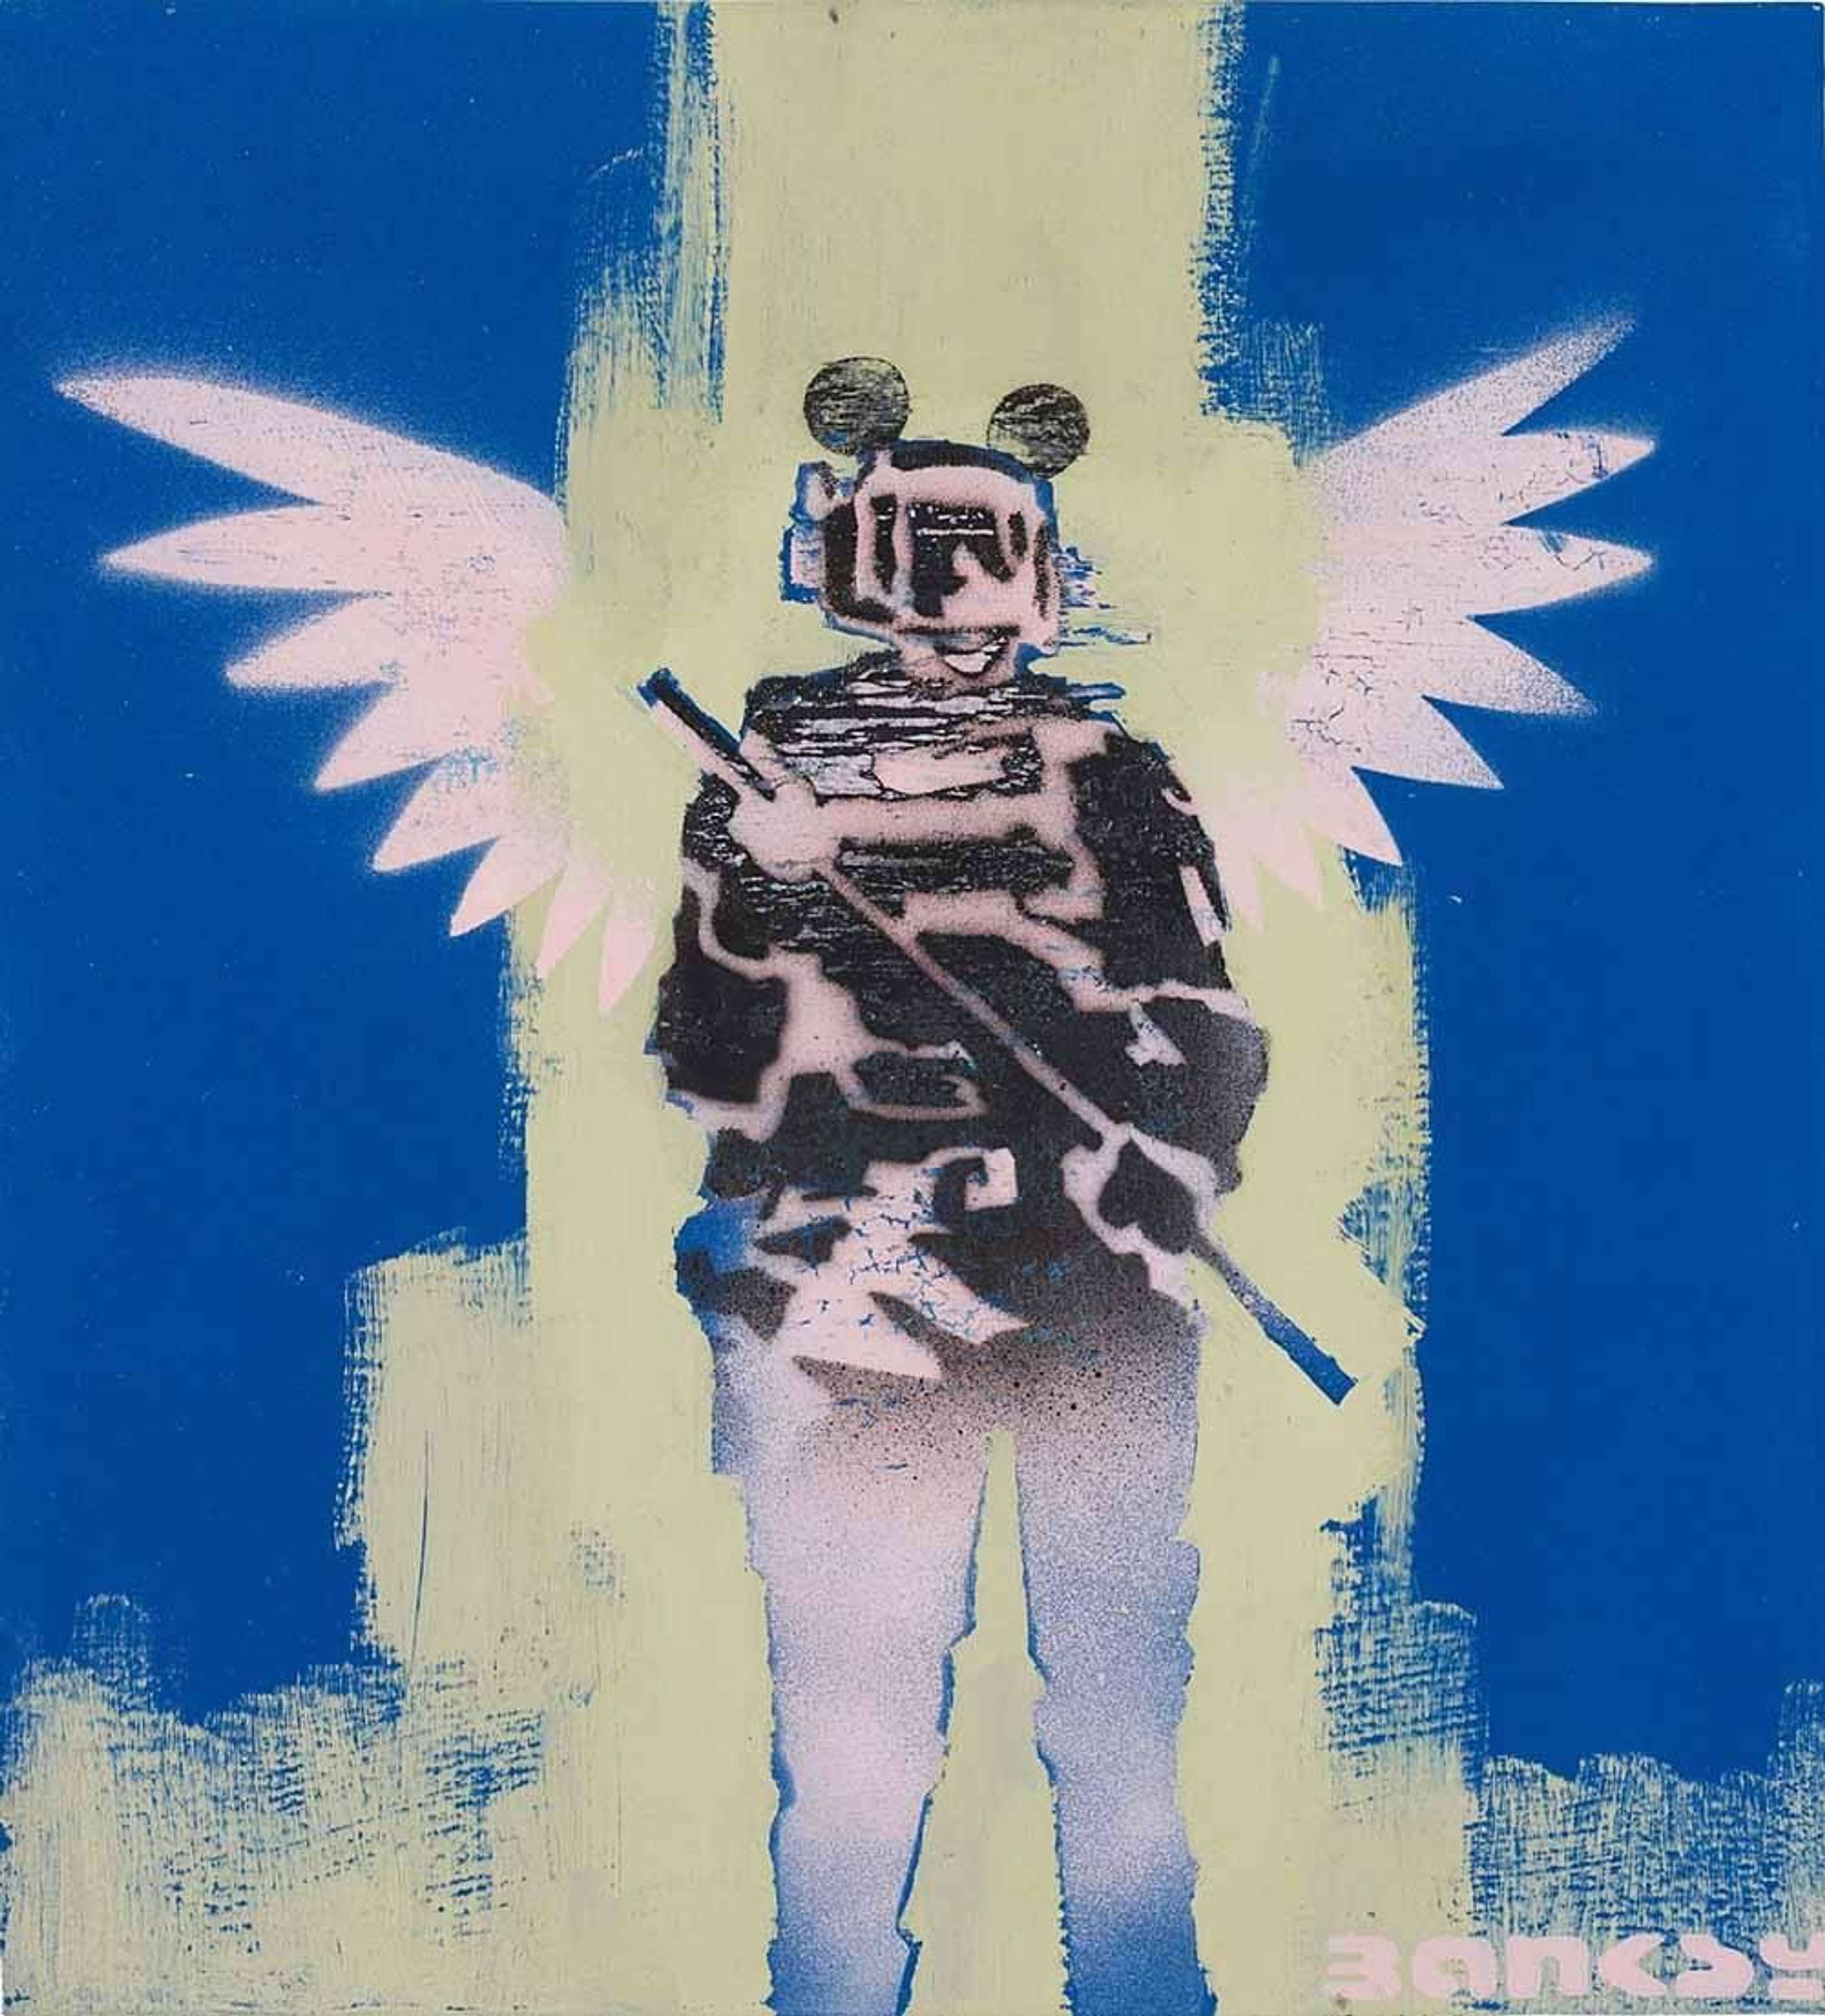 Banksy's Filth. A spray paint work of an armed police officer with Mickey Mouse ears and angel wings behind him.